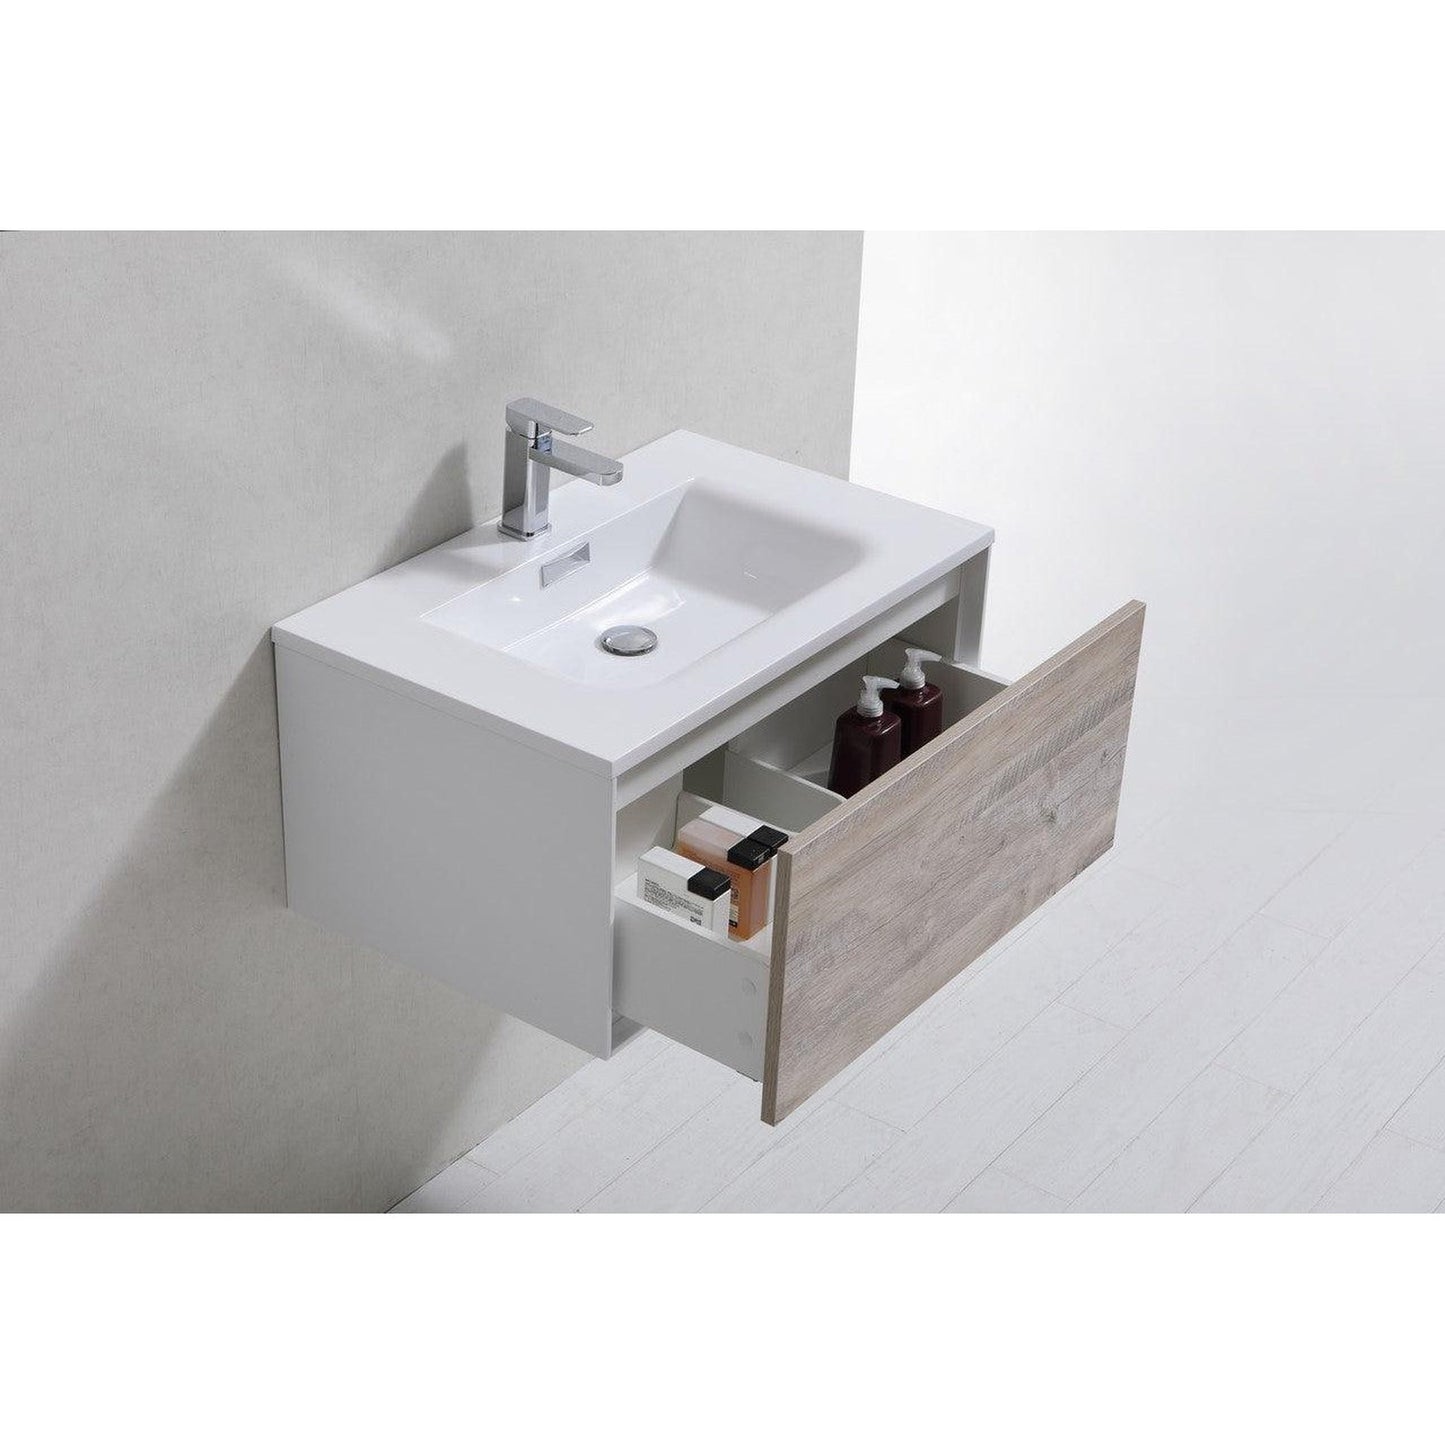 KubeBath Divario 30" Nature Wood Wall-Mount Modern Bathroom Vanity With Push-Open Drawer & Reinforced Acrylic Sink With Overflow and 30" Wood Framed Mirror With Shelf